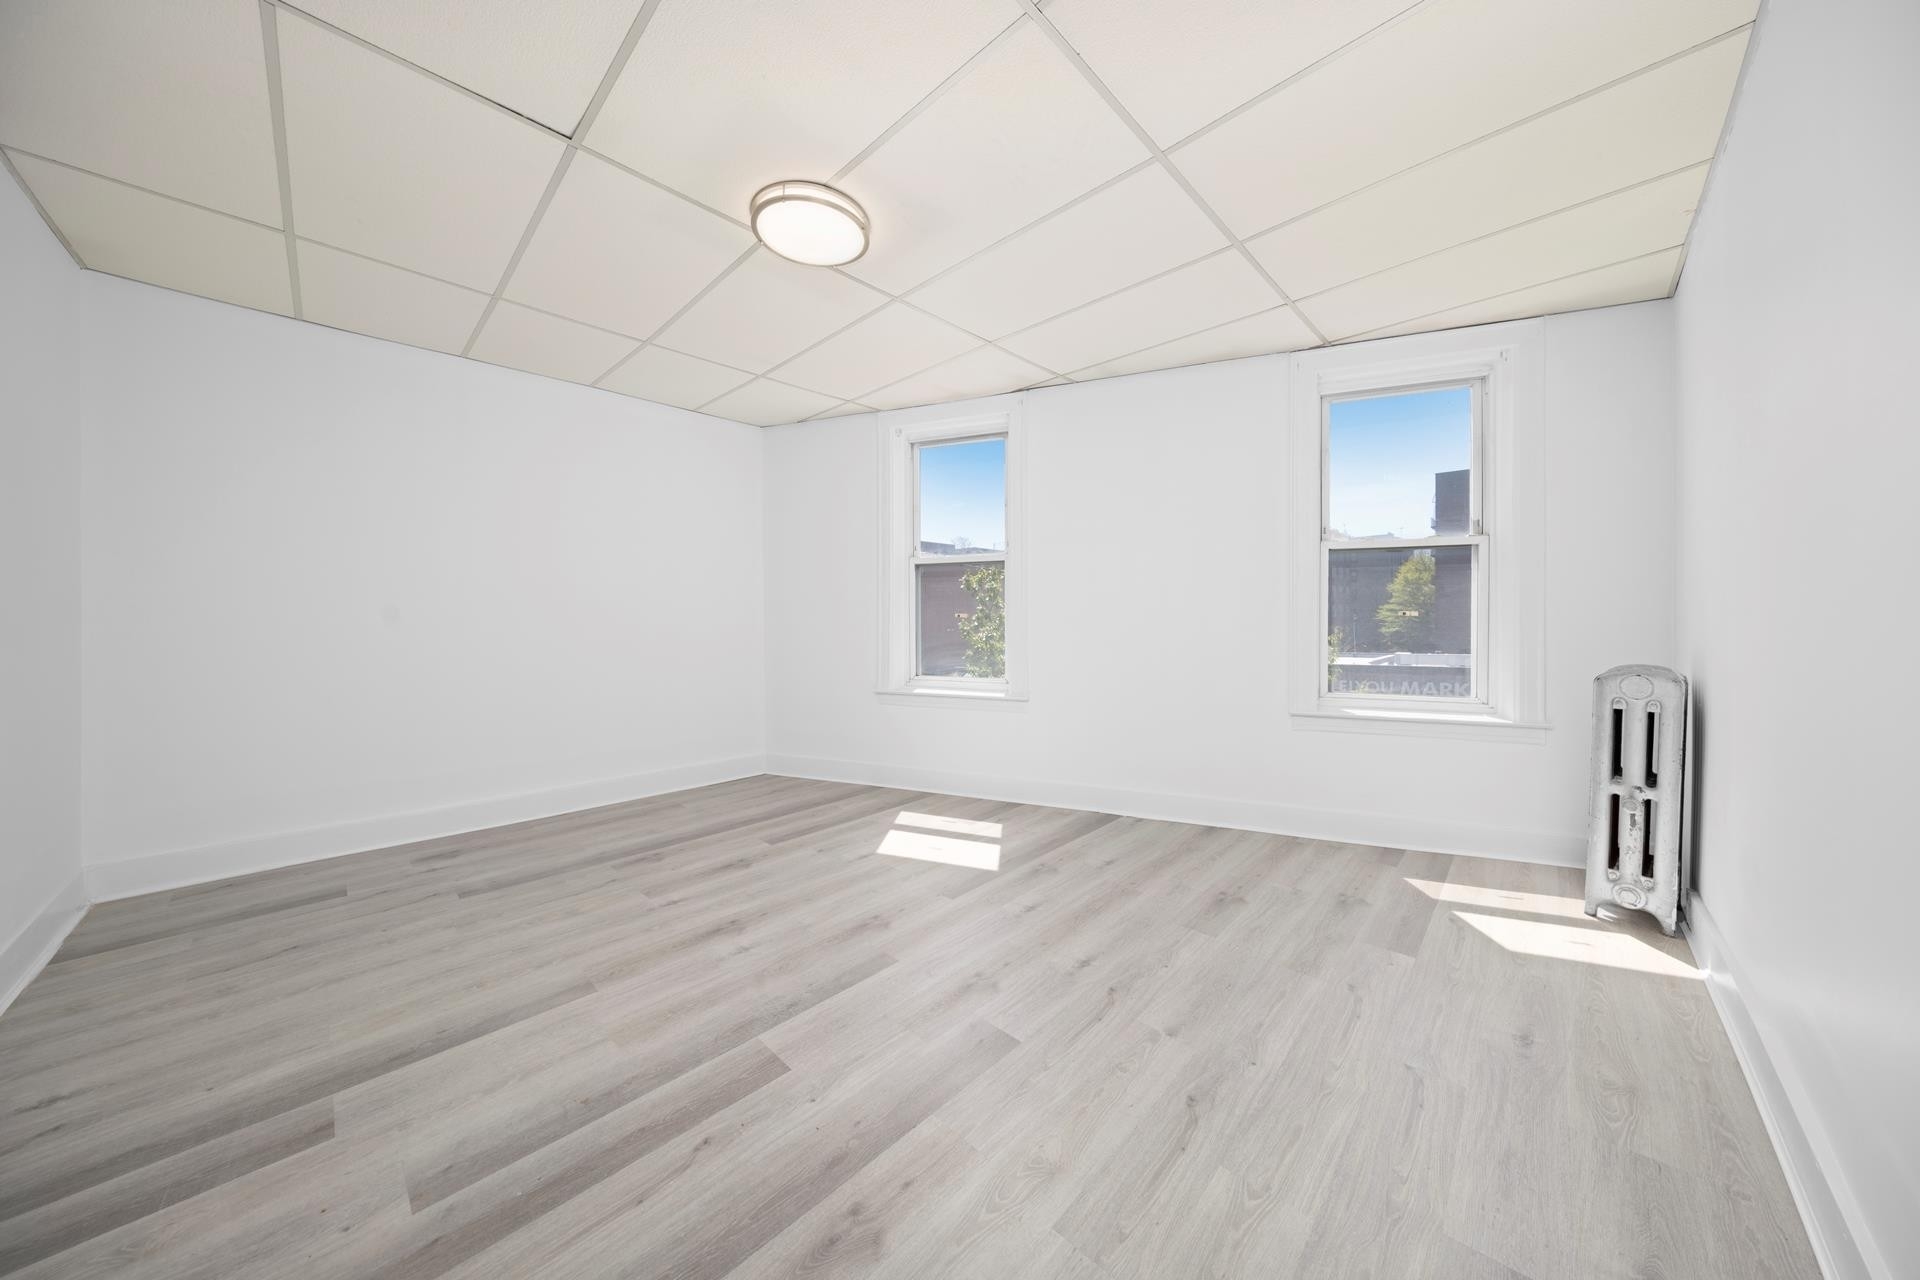 Property at 1607 CORTELYOU RD , 3 Brooklyn